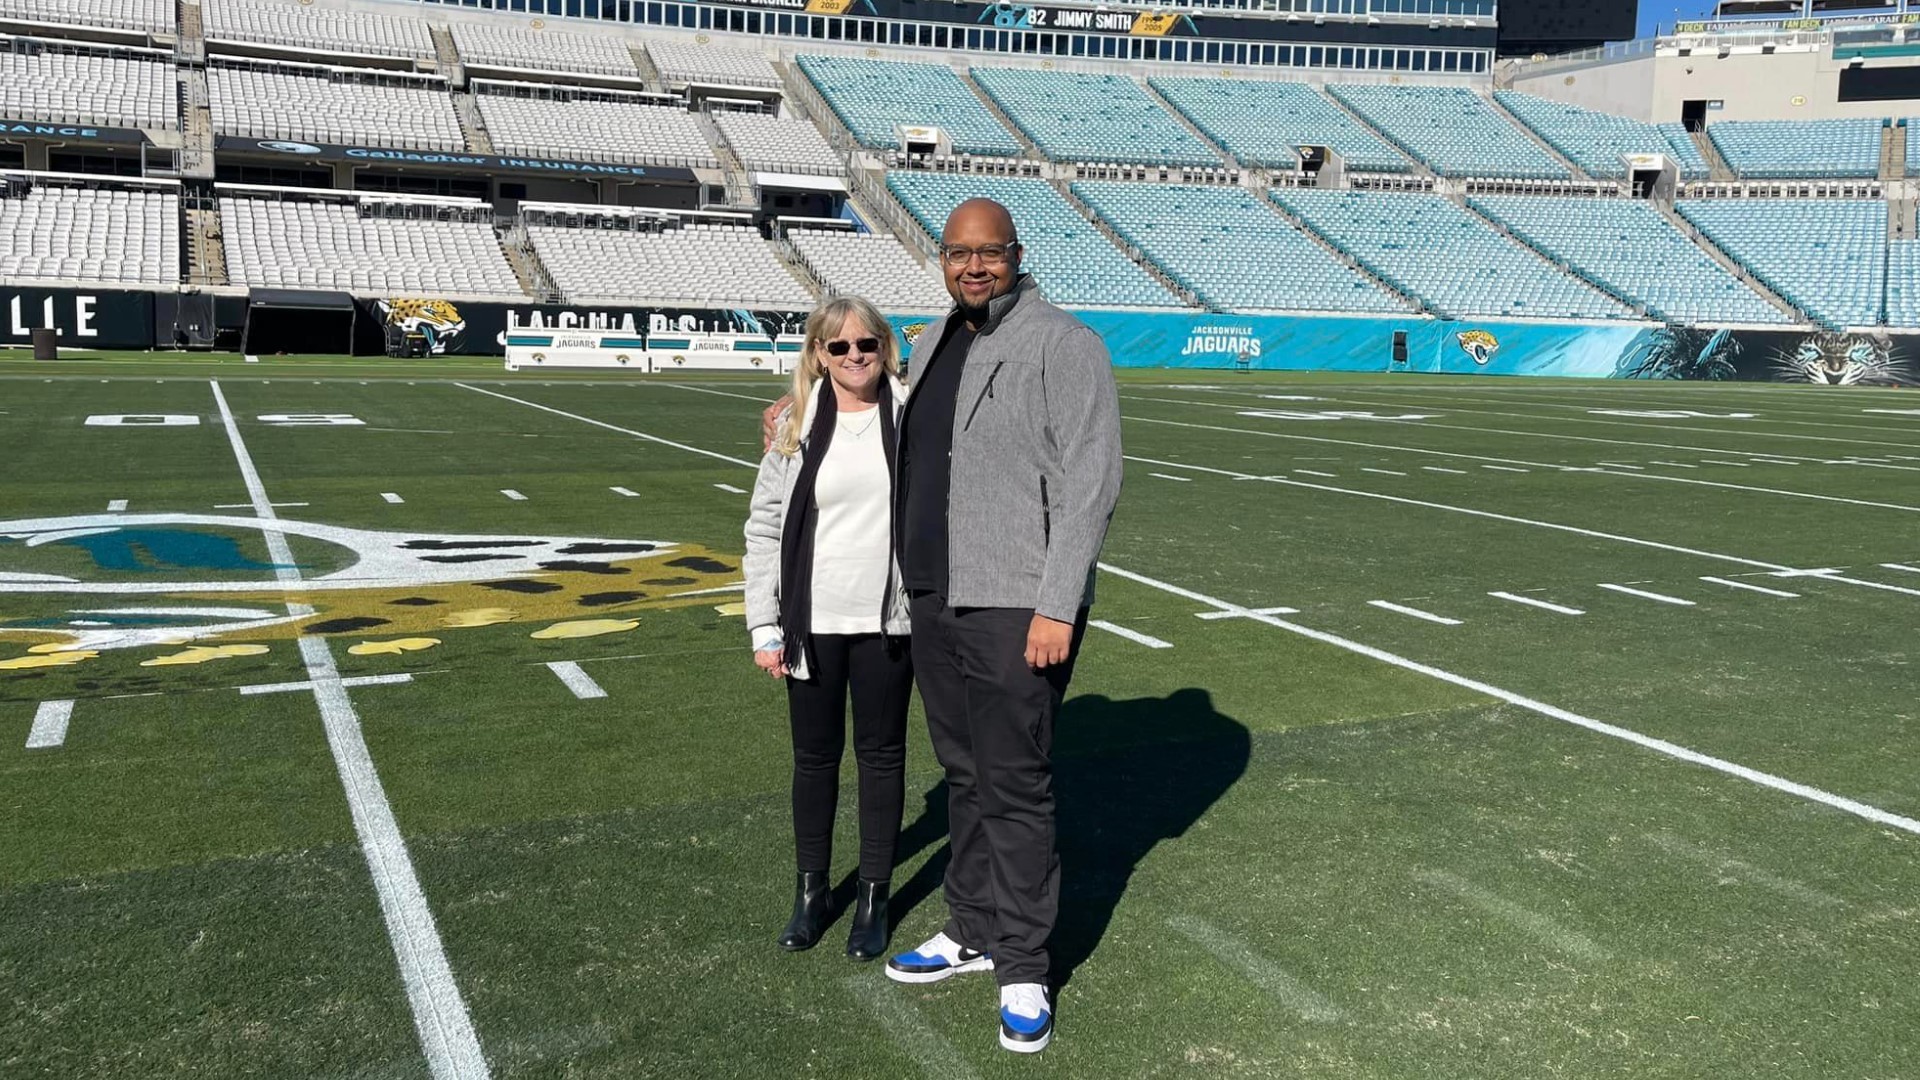 A Jacksonville woman's family asked Anthony Austin for help with an unusual birthday request. She wanted to see the field painted before a Jaguars game.